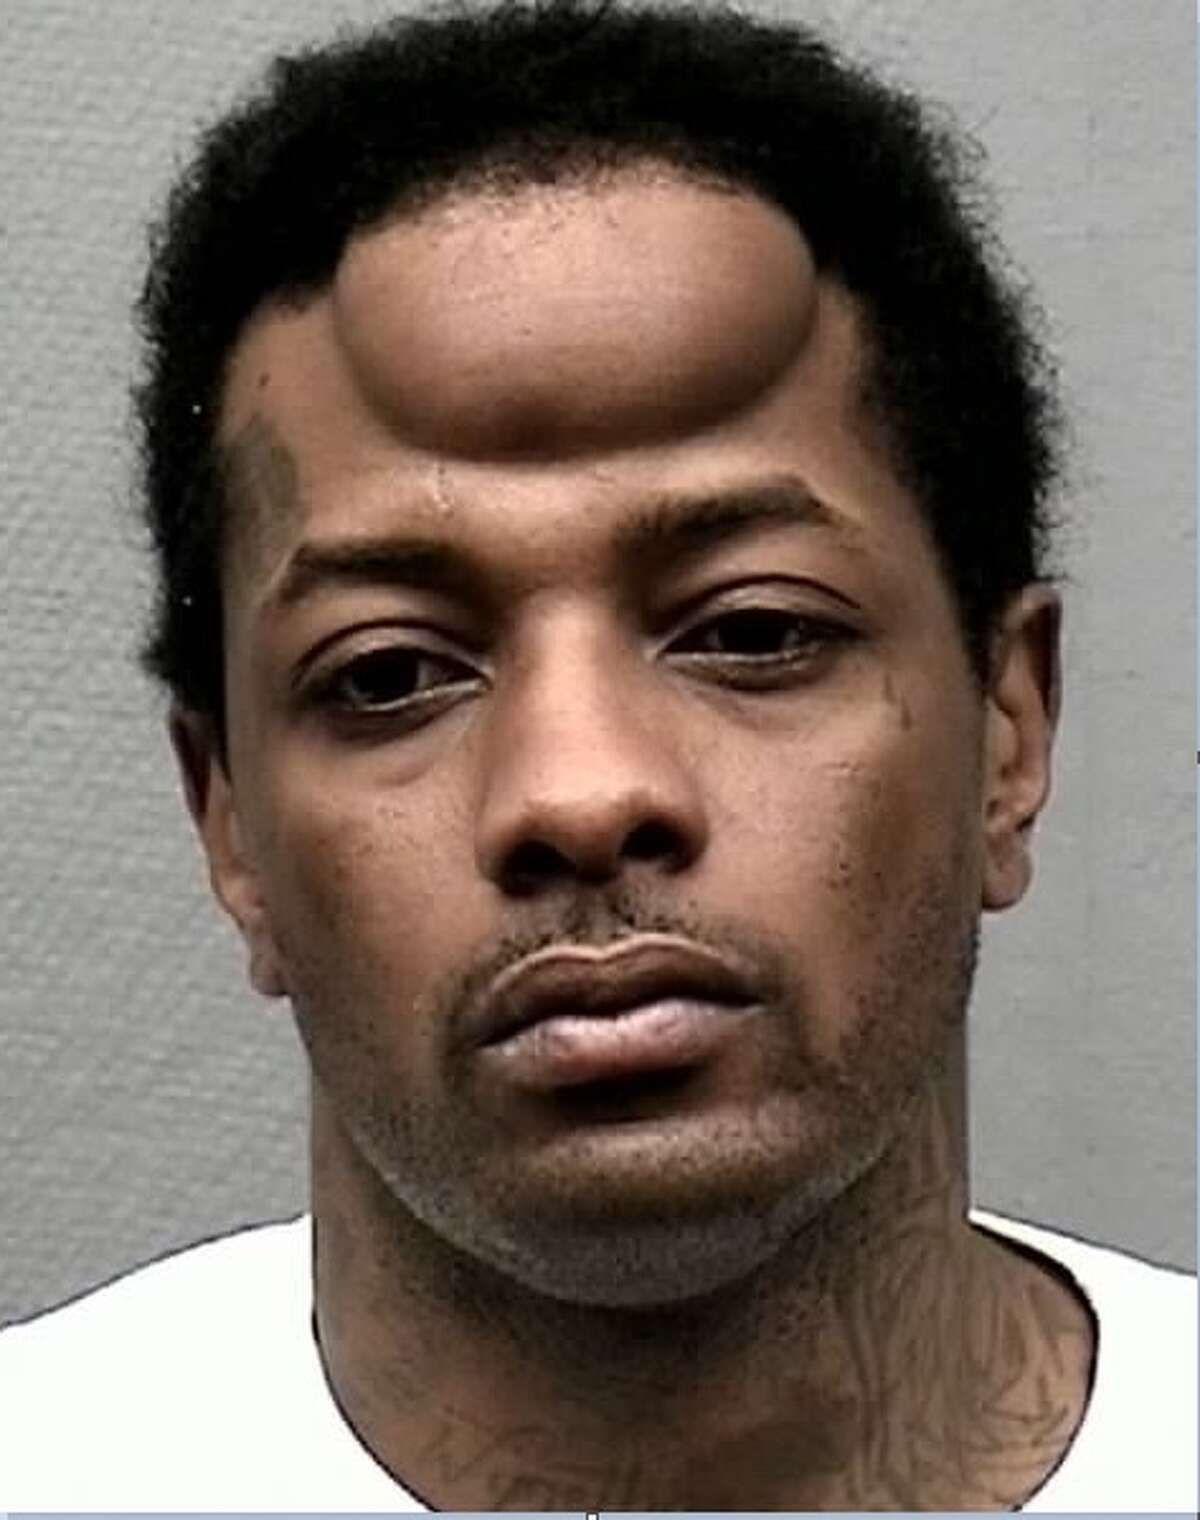 February 2017 — Jason Demond Gates and his girlfriend, Mercedes Angel McDonald, were charged with capital murder after authorities discovered the burned body of a 58-year-old man in the back of a pickup truck in southeast Houston. His arrest came nearly a year after the crime. Read the full story here.